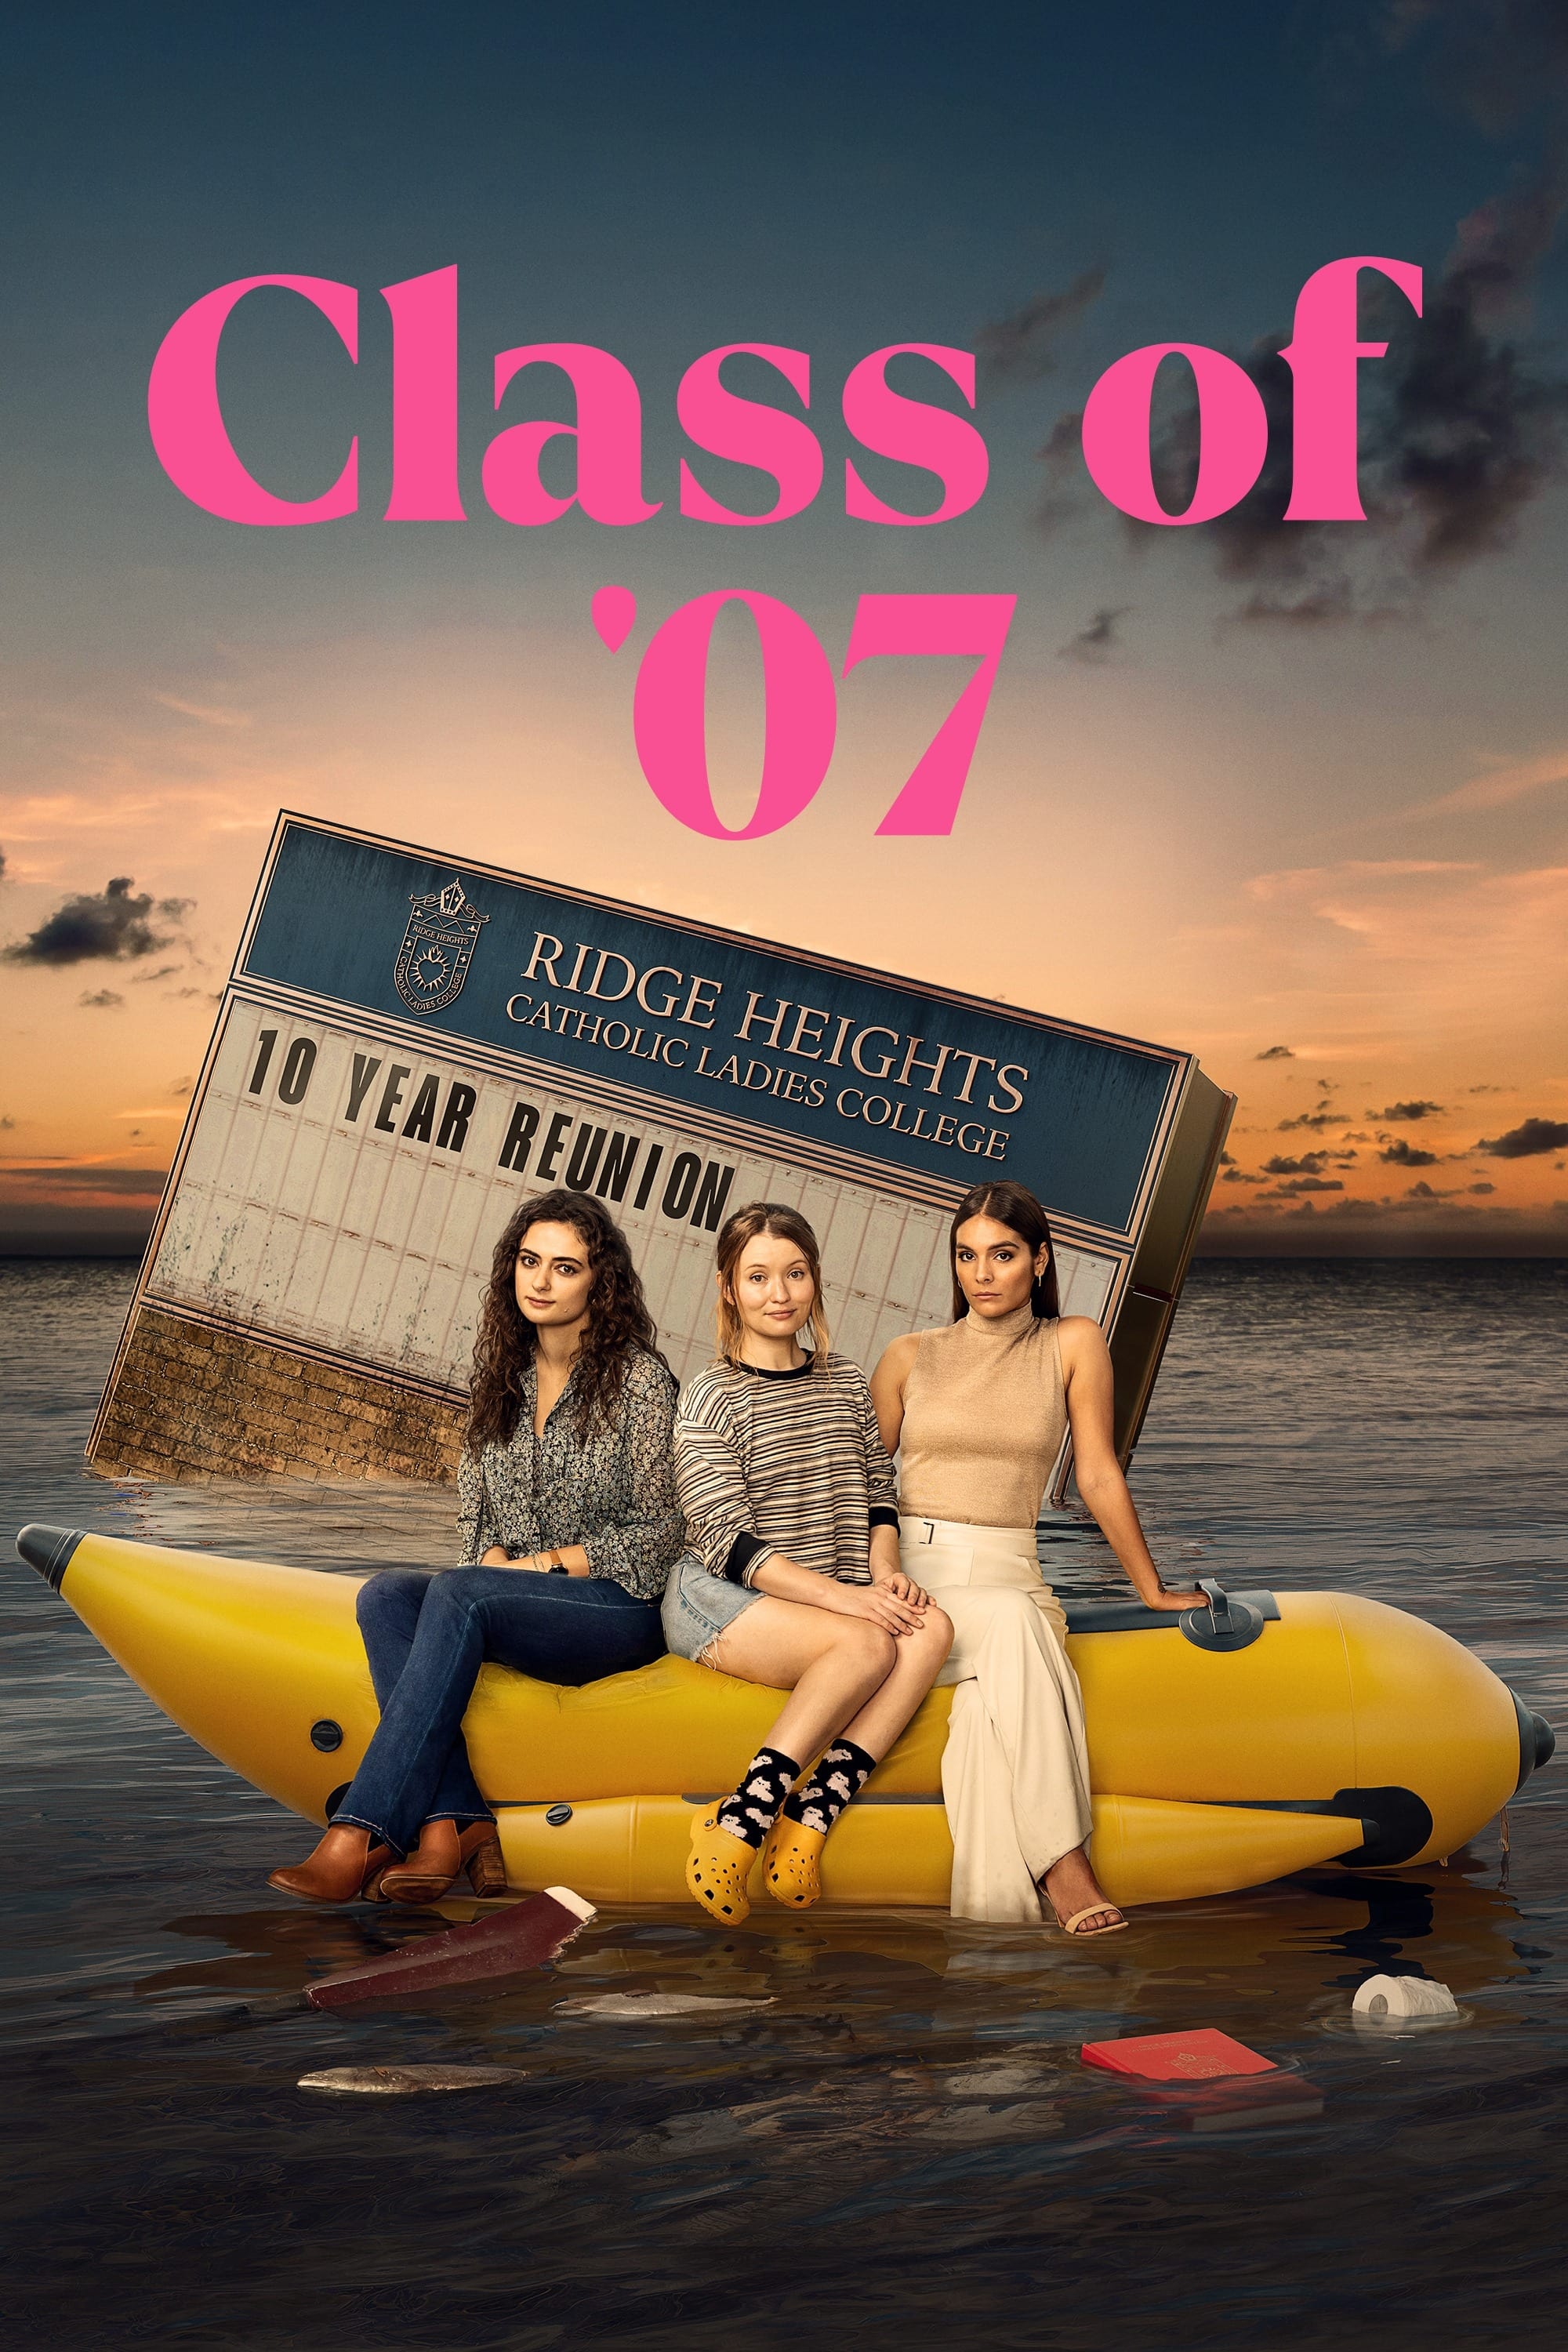 Class of '07 TV Shows About High School